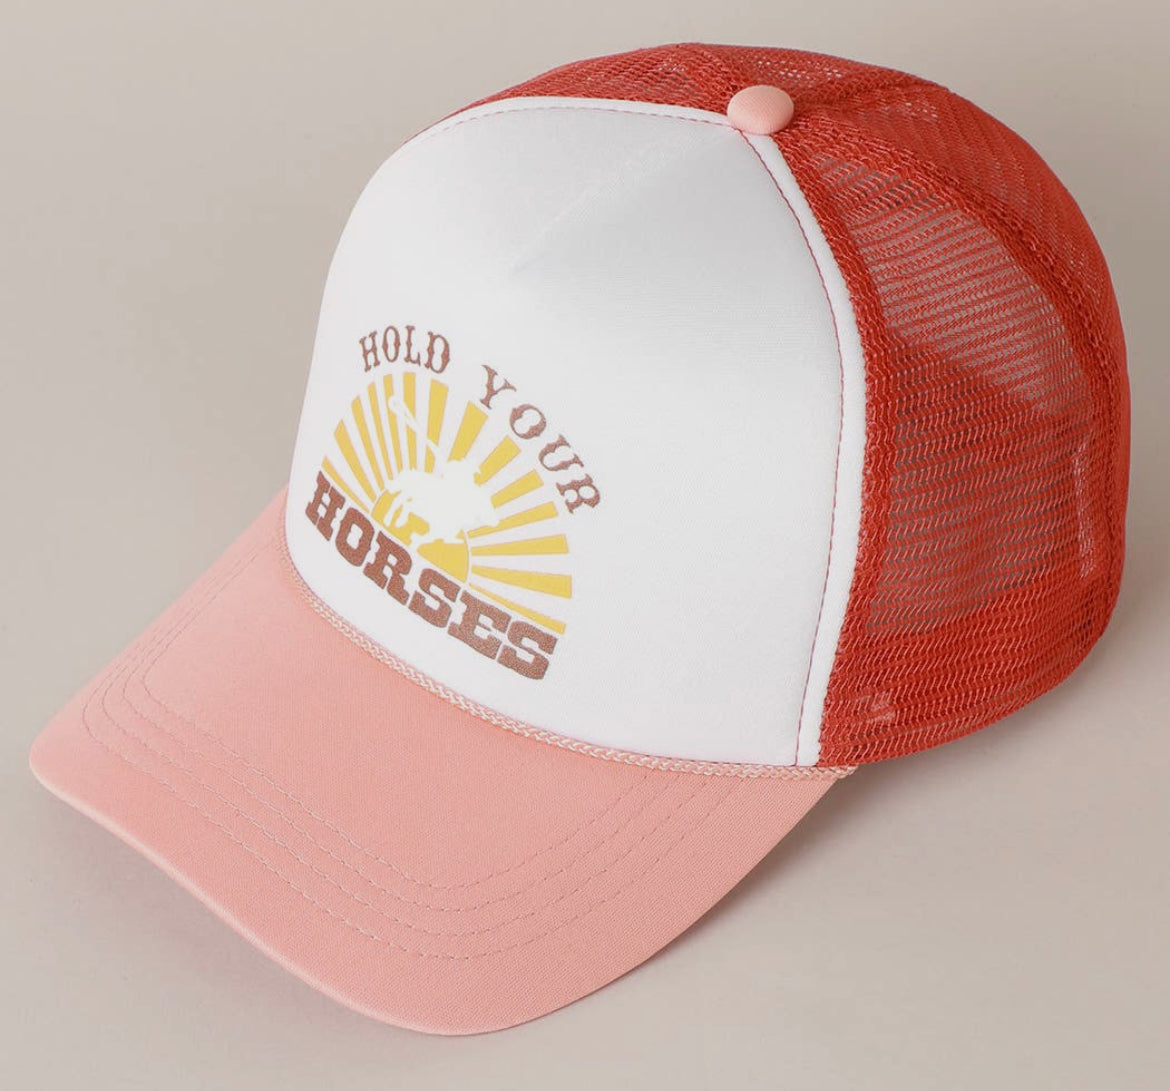 Hold Your Horses Trucker Hat! 2 Color Options!